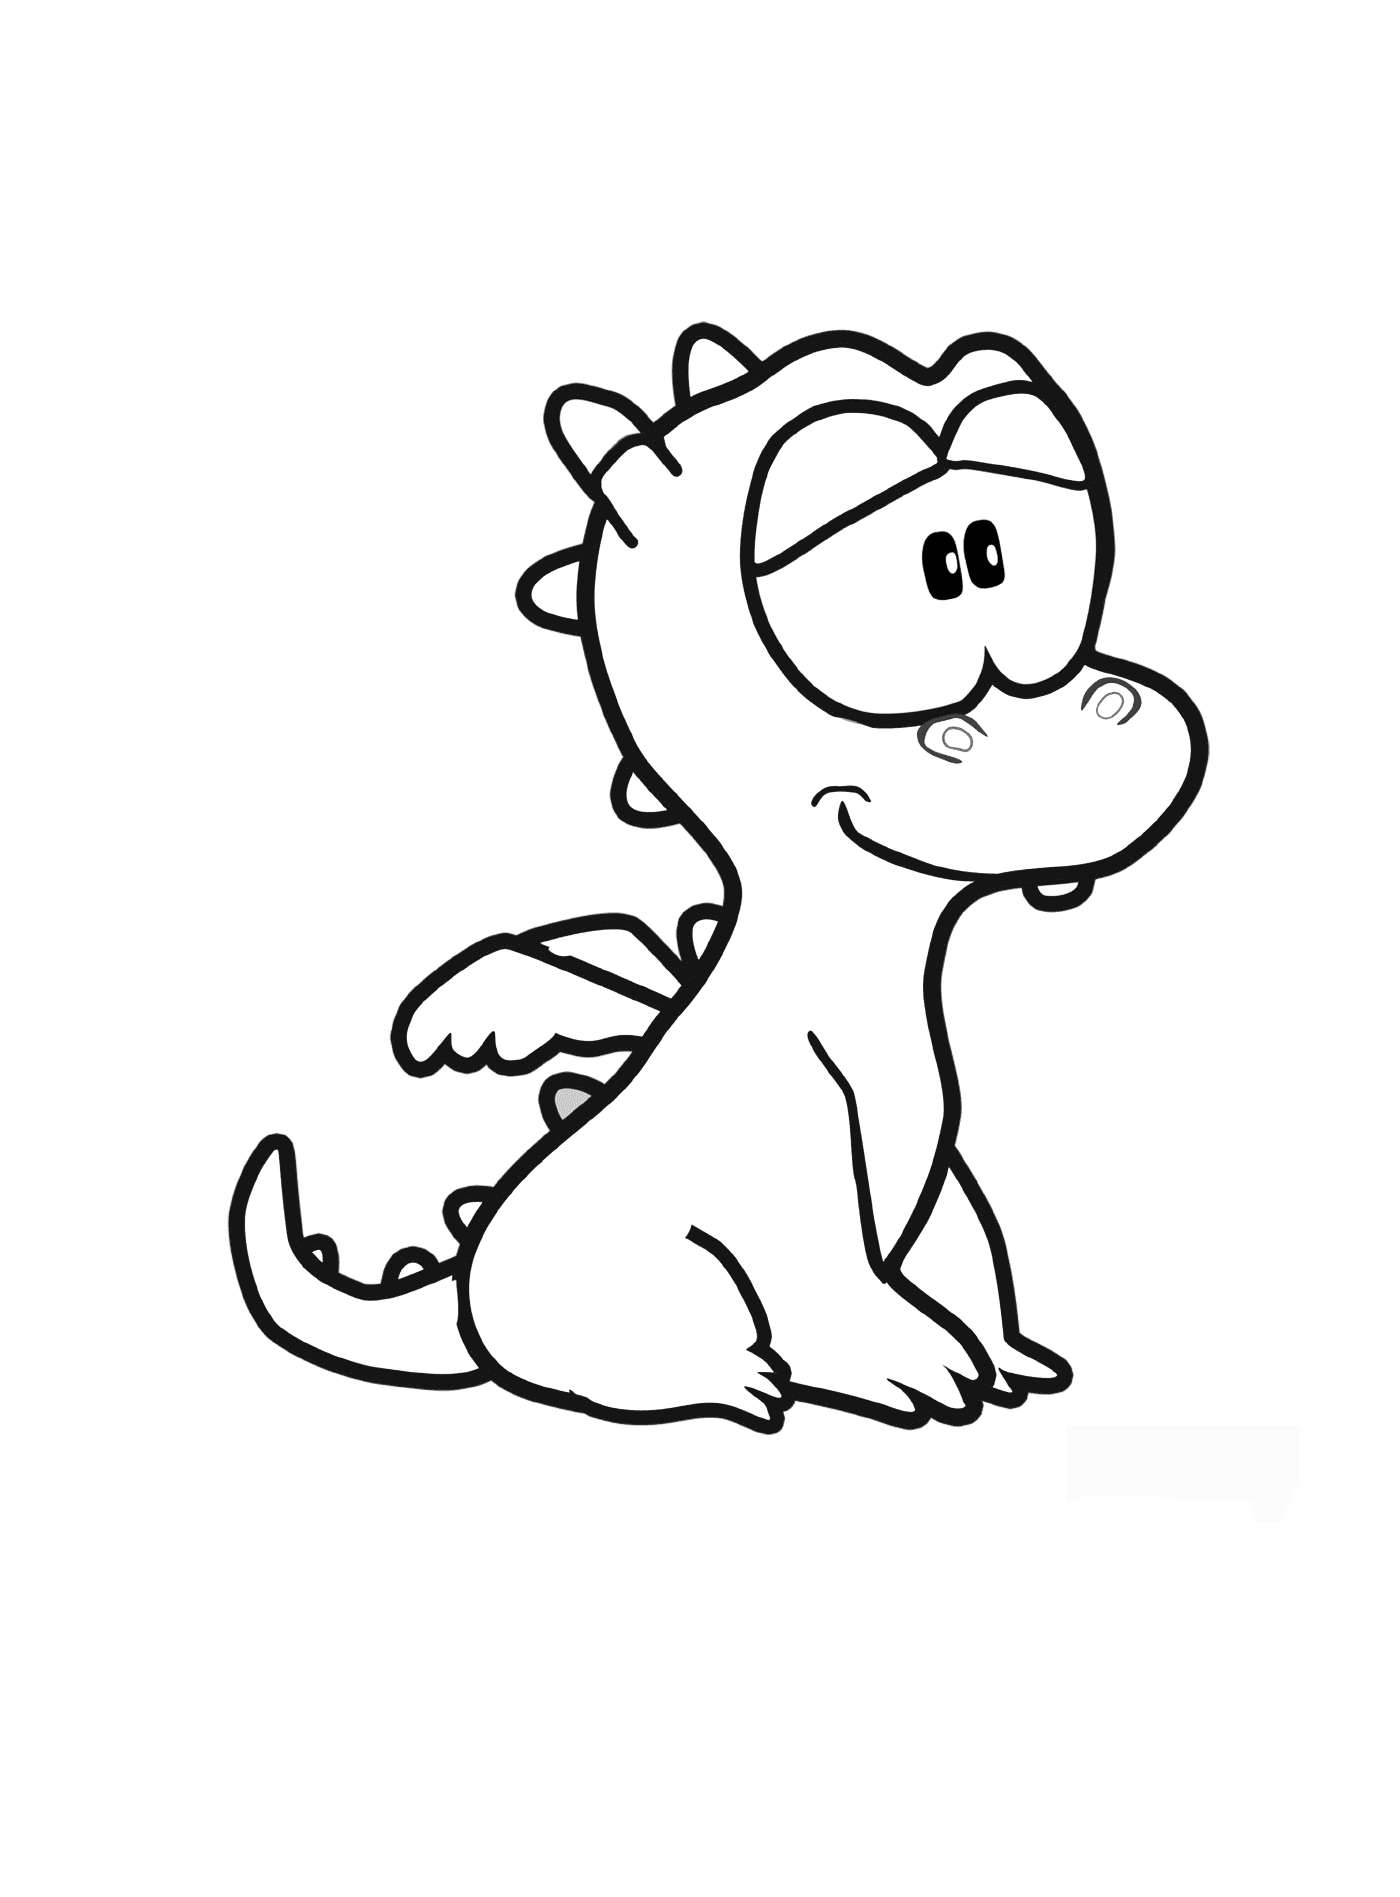  An easy to draw dragon 